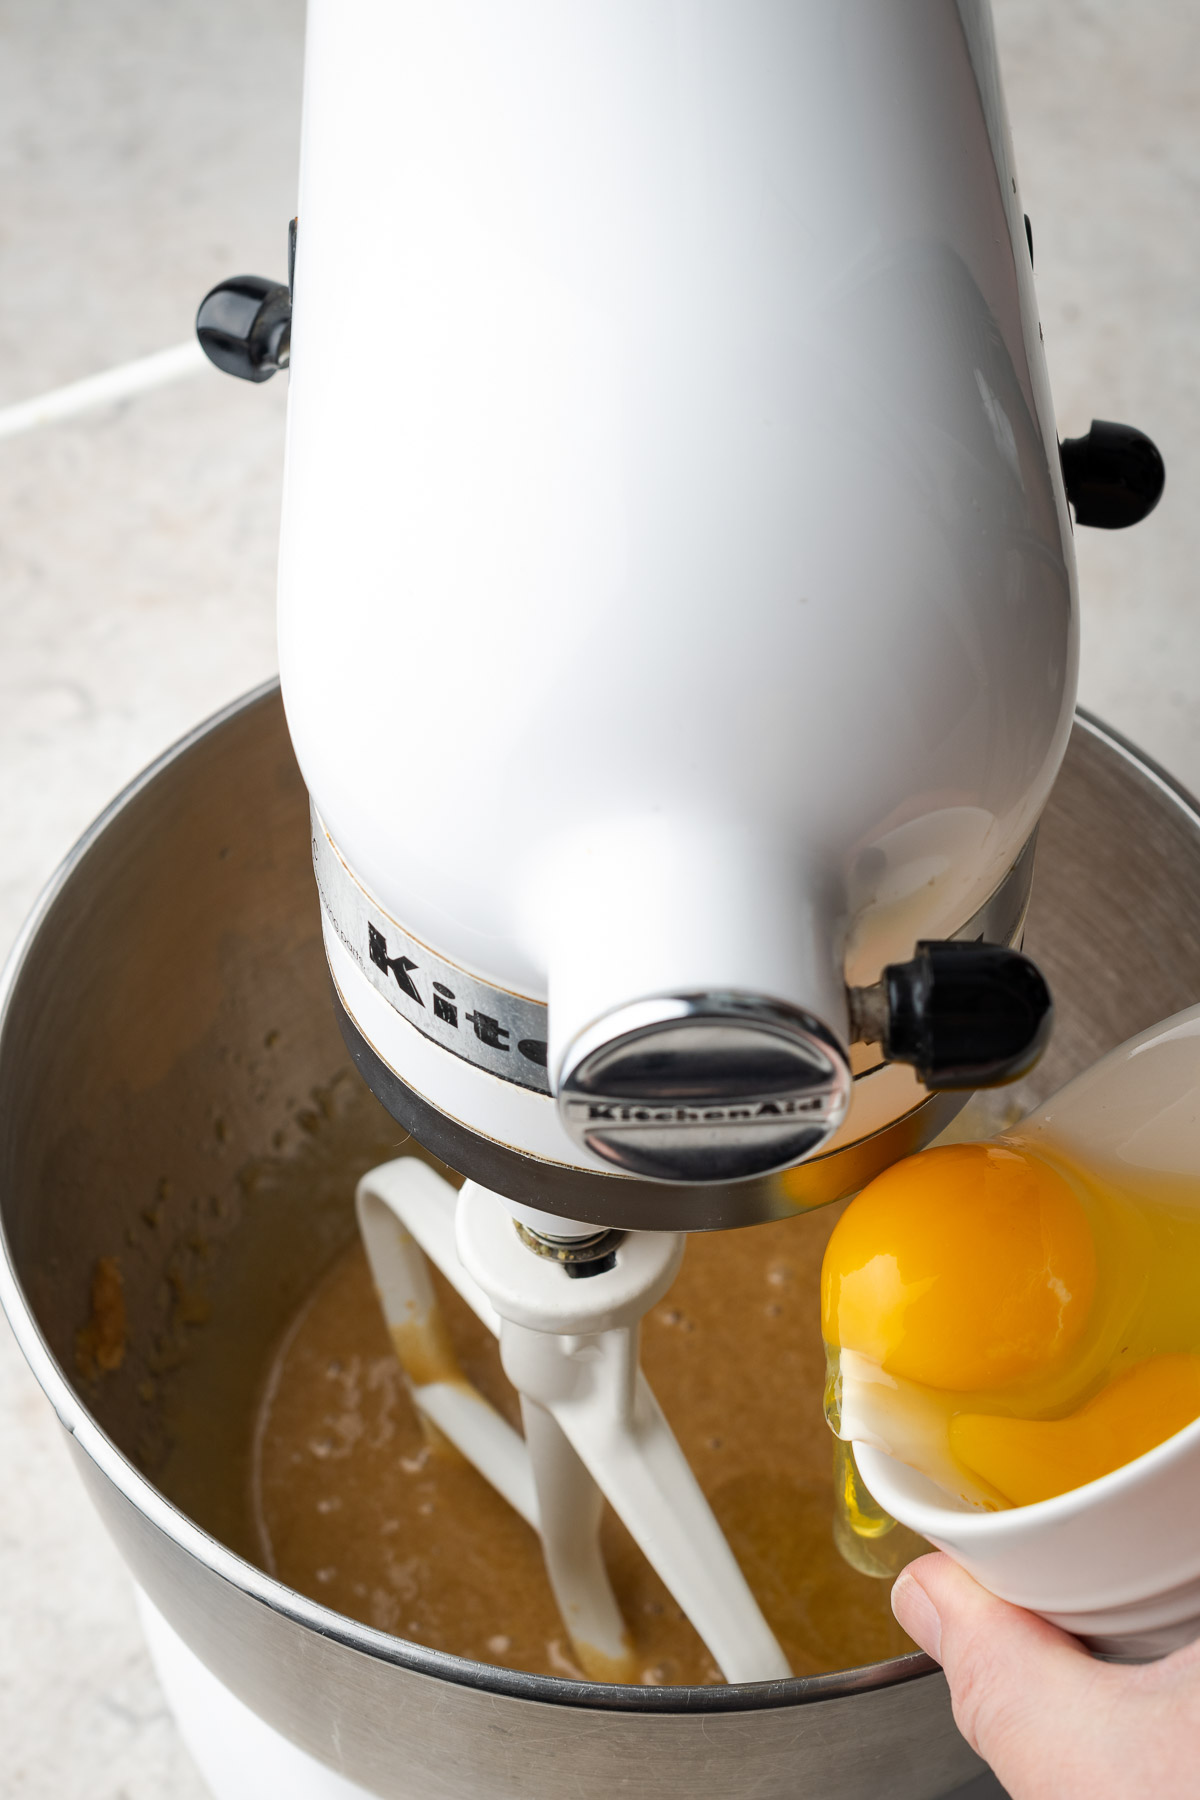 Adding eggs to batter in a kitchen aid mixer.